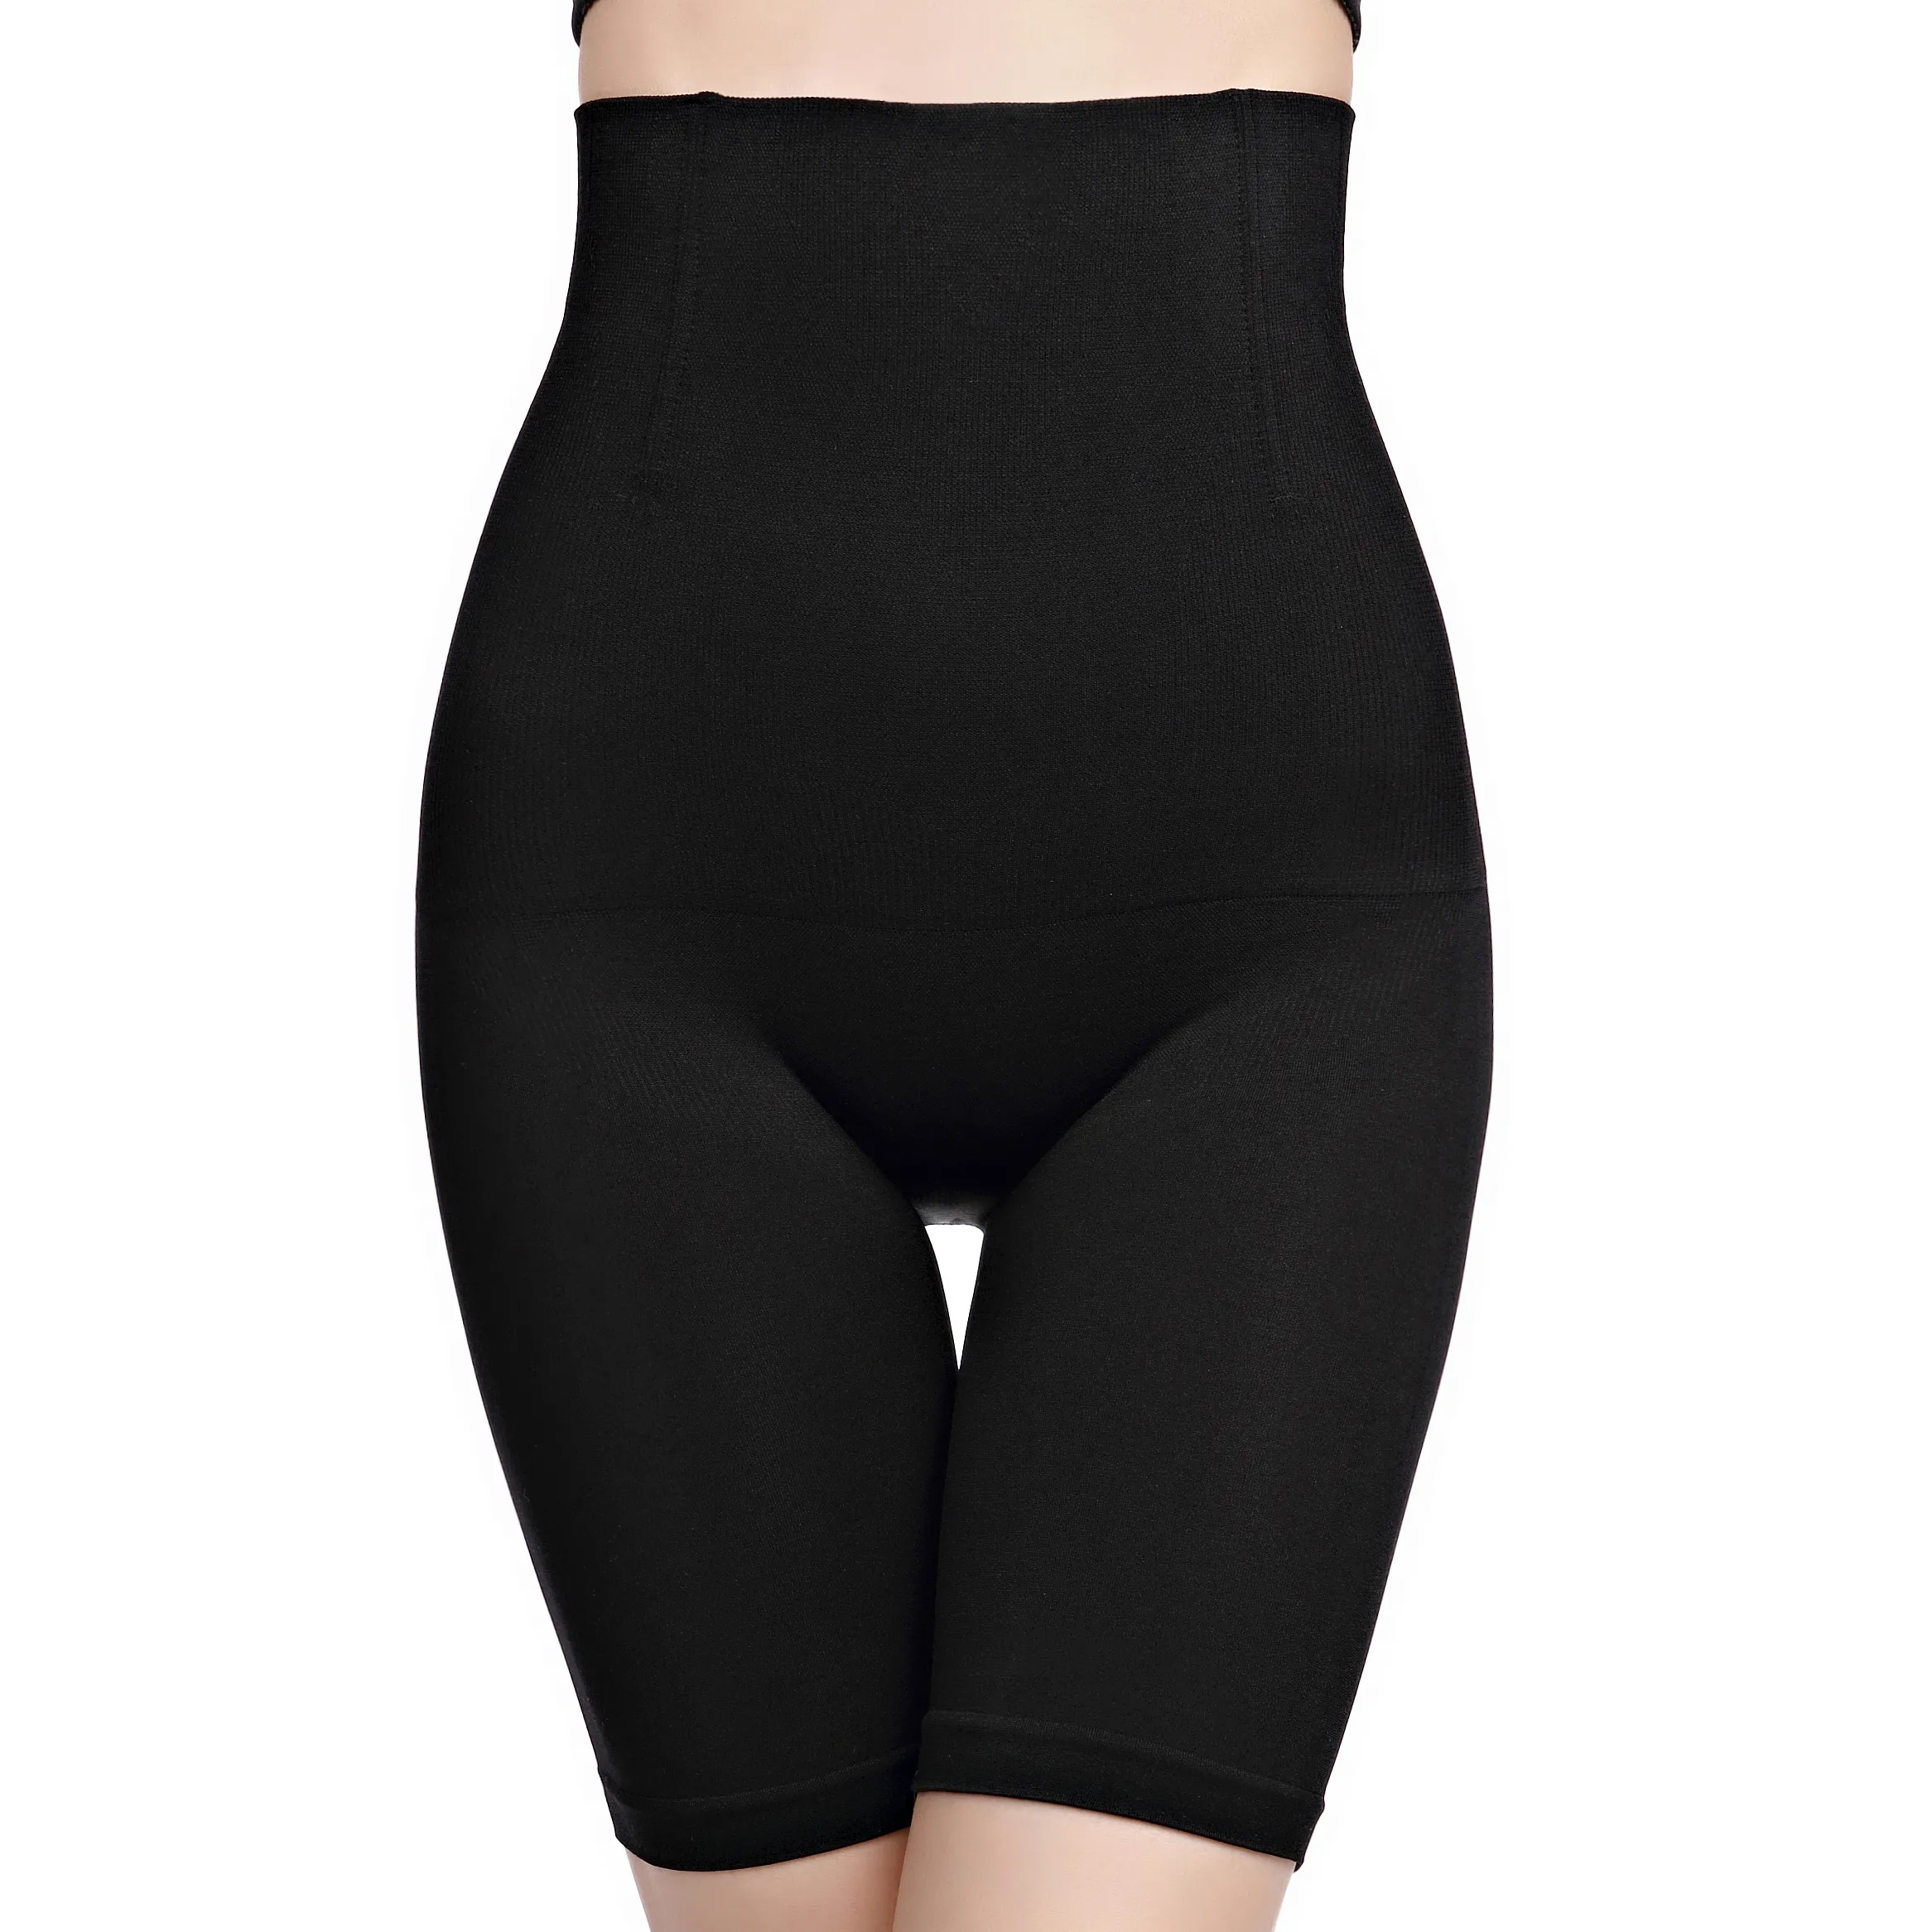 Women's Body Shapers Tummy Control Shapewear High Waist Mid-Thigh Slimmer Shorts panties shapers